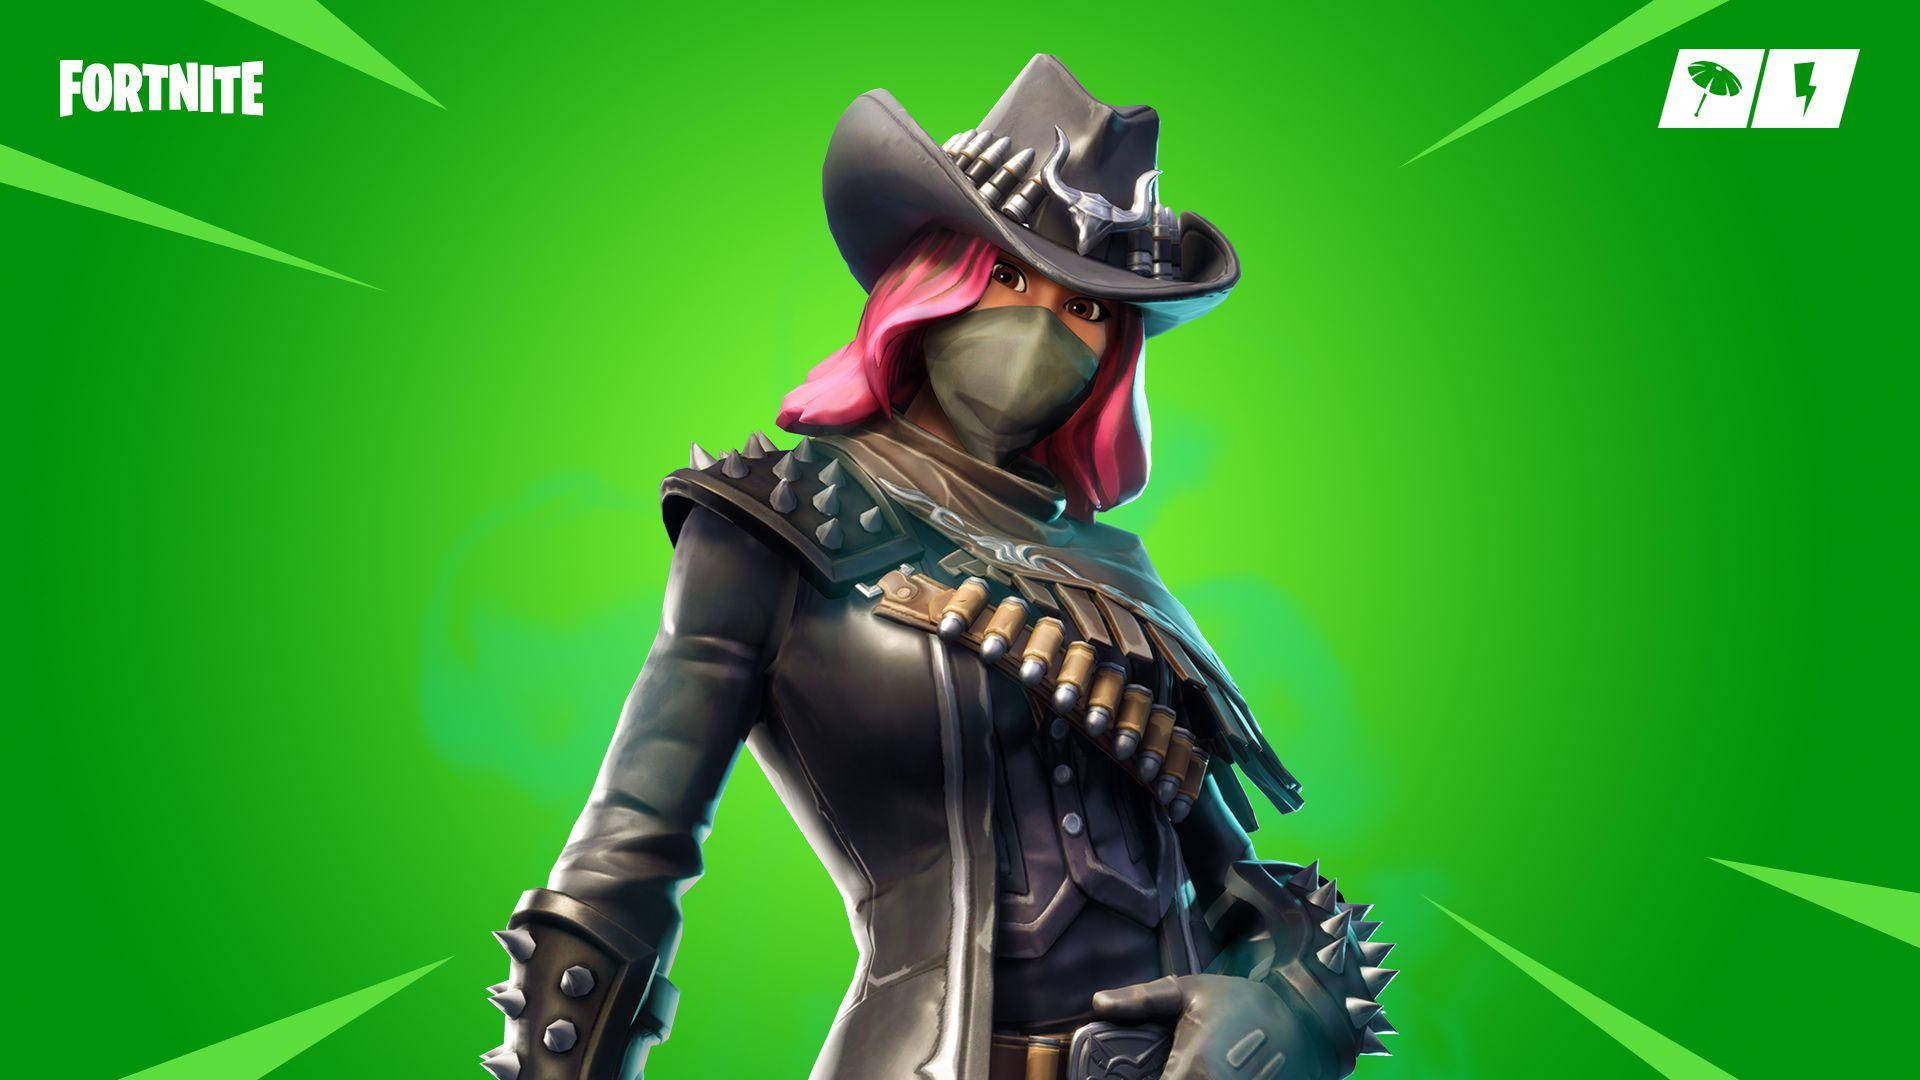 Calamity Fortnite Stage 5 Green Background